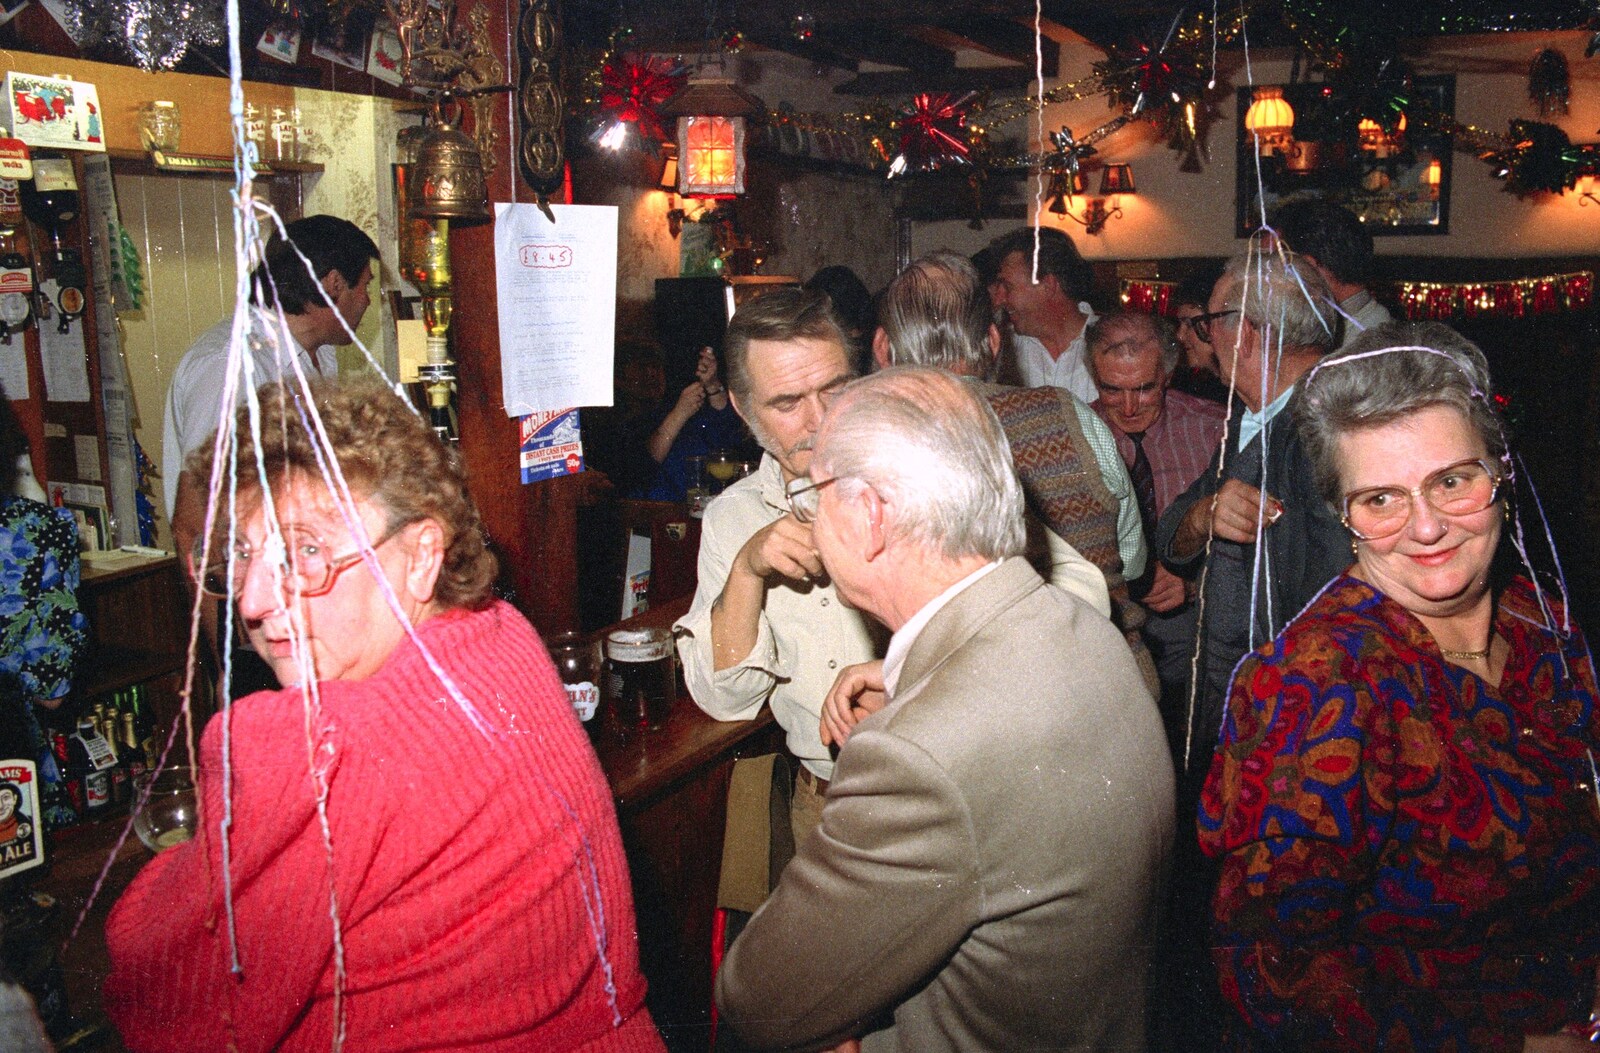 Arline looks around in a post-party-popper warzone from New Year's Eve at the Swan Inn, Brome, Suffolk - 31st December 1991